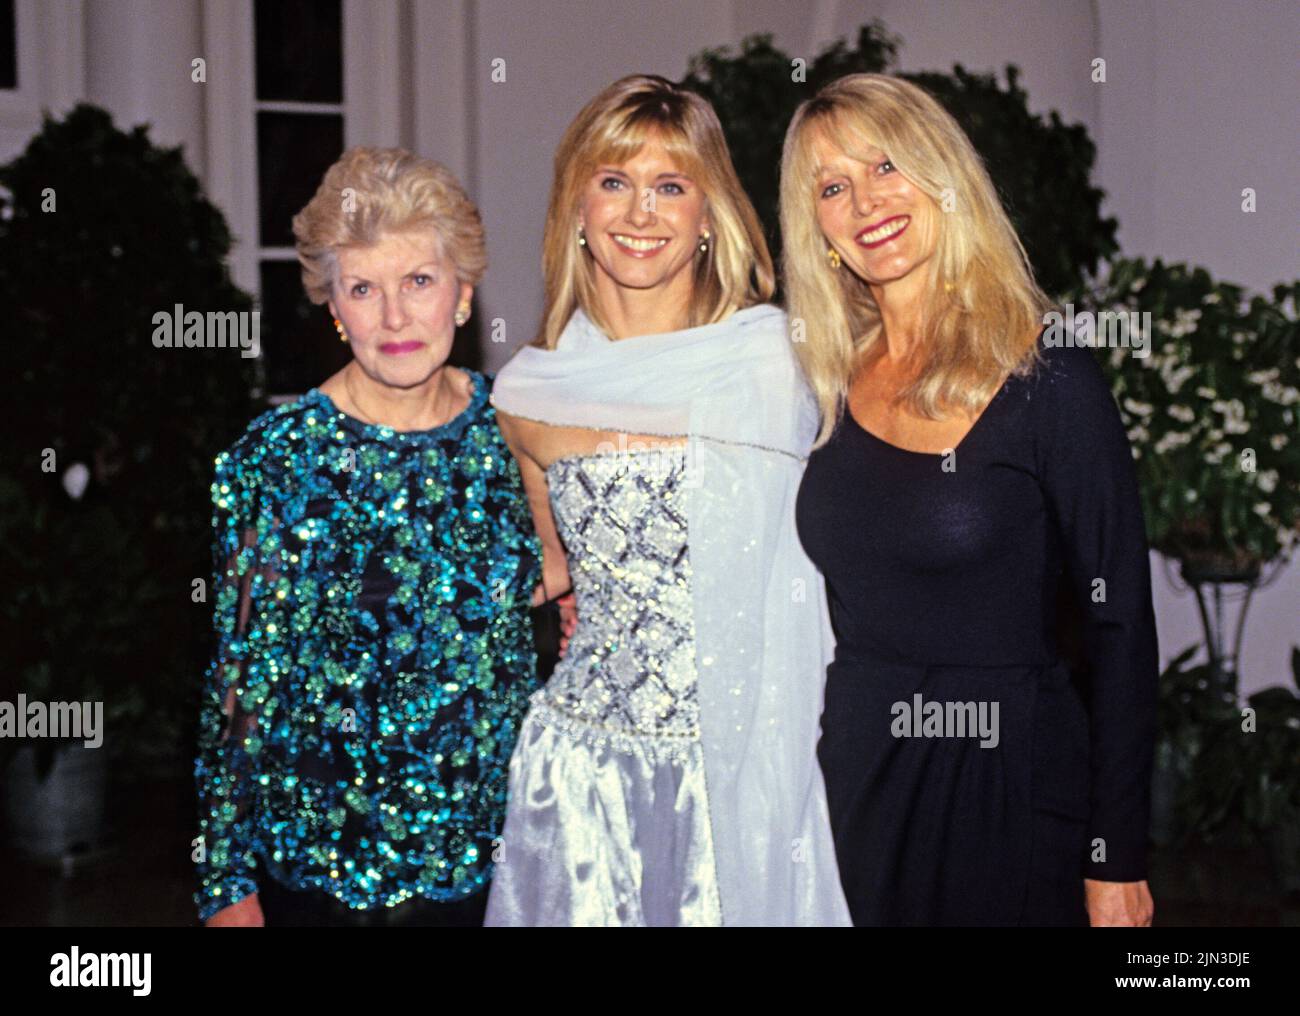 Australian singer, songwriter and actress Olivia Newton-John, center, arrives for the State Dinner hosted by United States President George H.W. Bush and first lady Barbara Bush honoring President Václav Havel of Czechoslovakia at the White House in Washington, DC with her mother, Irene Newton-John, left, and sister, Rona Newton-John, right, on October 22, 1991. Credit: Ron Sachs/CNP Stock Photo